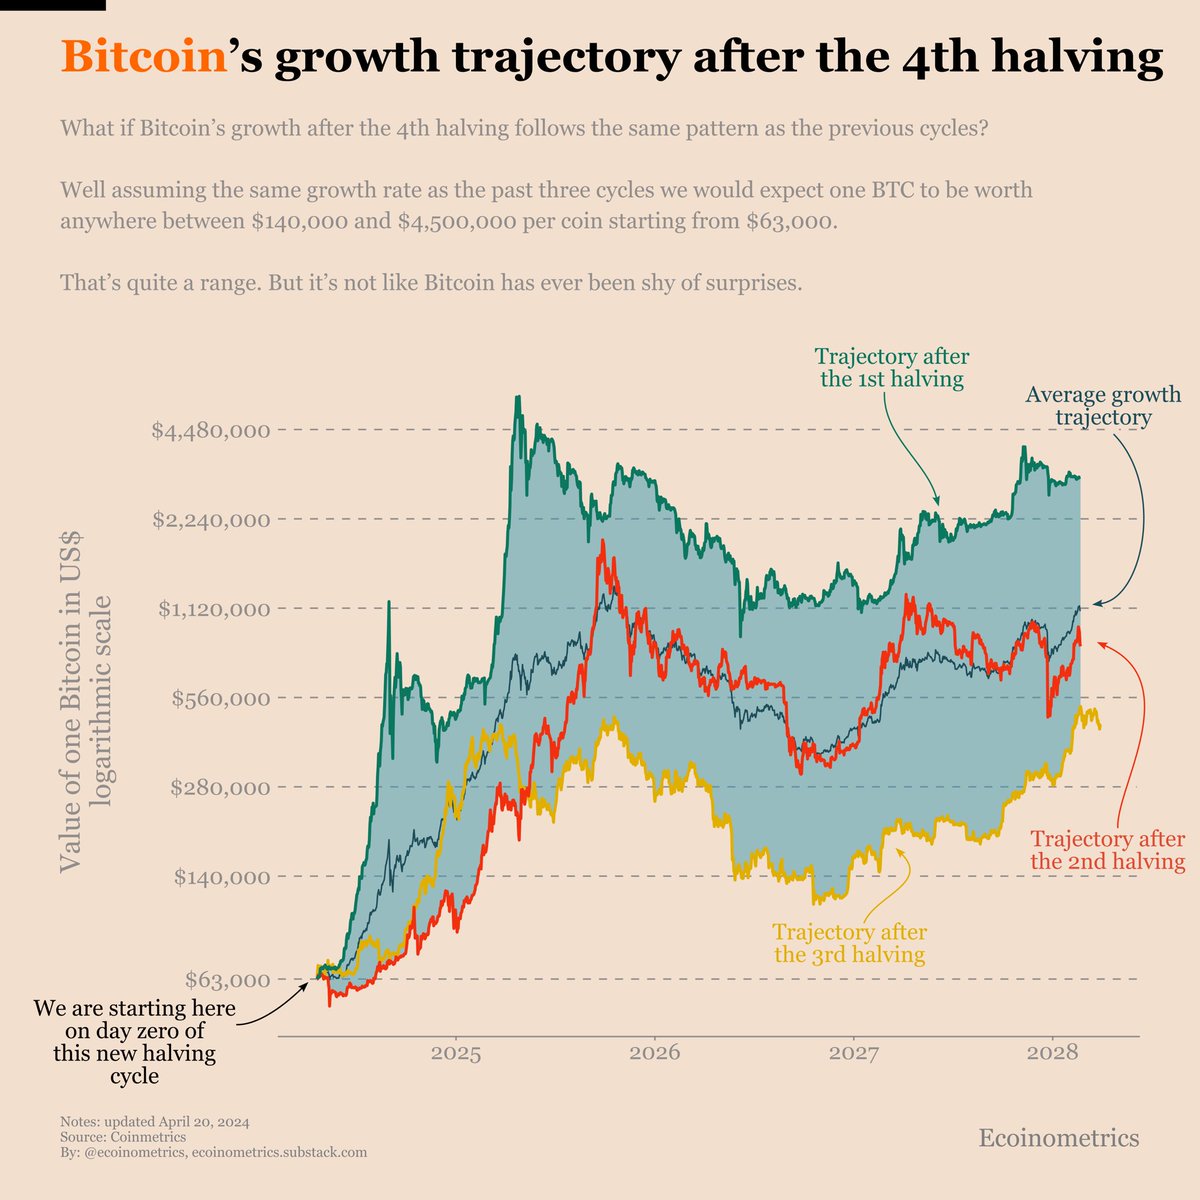 Price range for Bitcoin in the 4th halving cycle: upper bound ~ $4,500,000 lower bound ~ $140,000 That is *if* Bitcoin ends up following a growth trajectory in the range of the previous cycles.